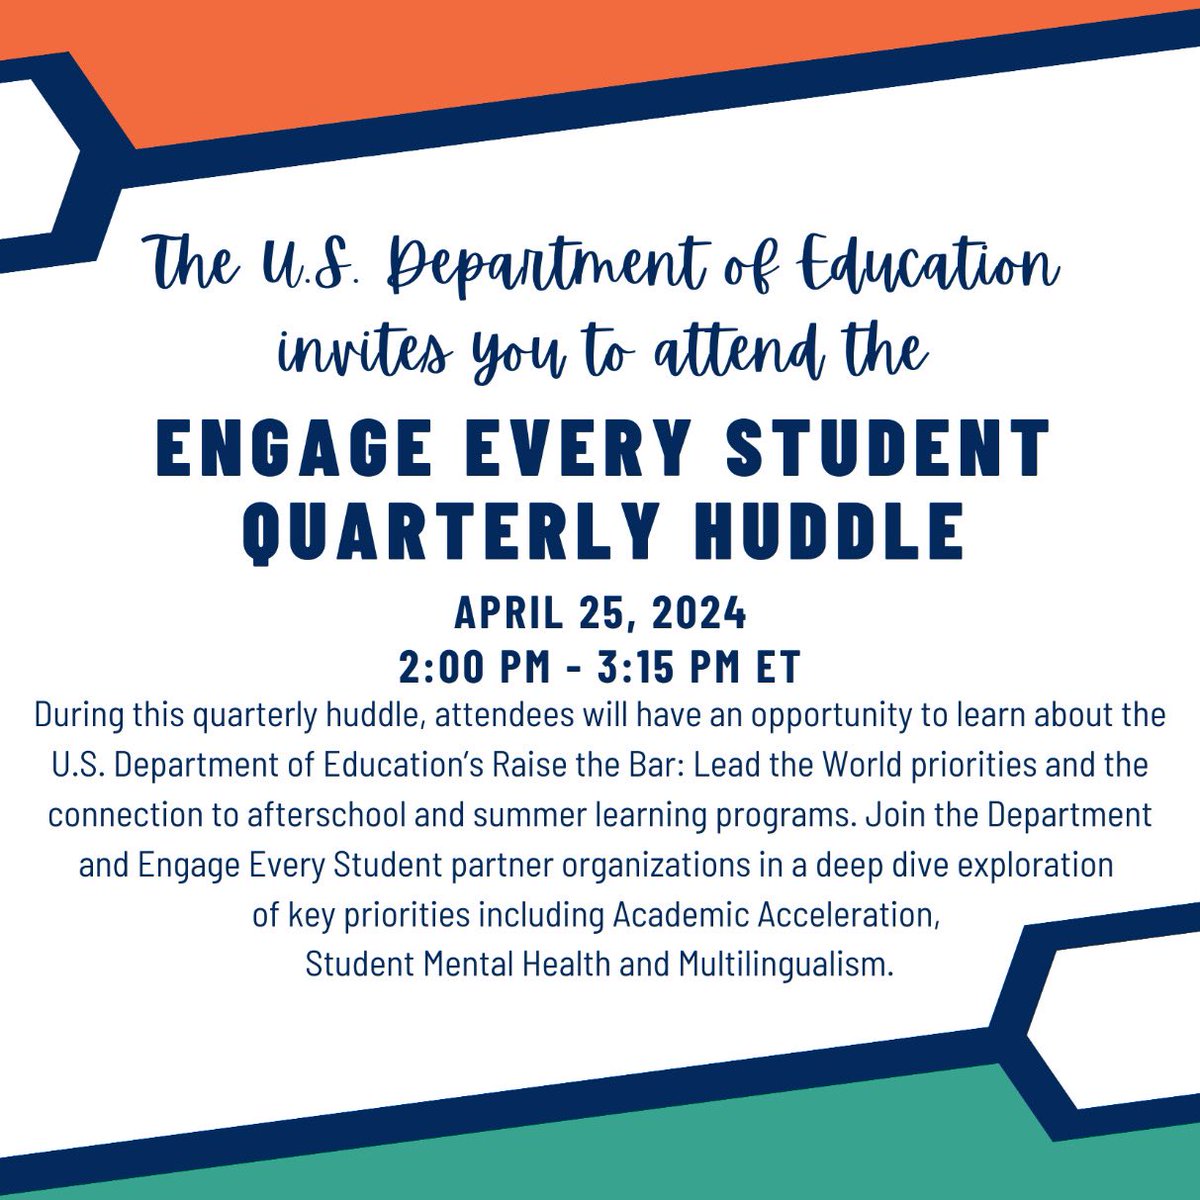 Be sure to attend the U.S Department of Education’s “Engage Every Student Quarterly Huddle” next Thursday for the opportunity to learn about the U.S. Department of Education’s Raise the Bar: Lead the World priorities and the connection to afterschool and summer learning programs.